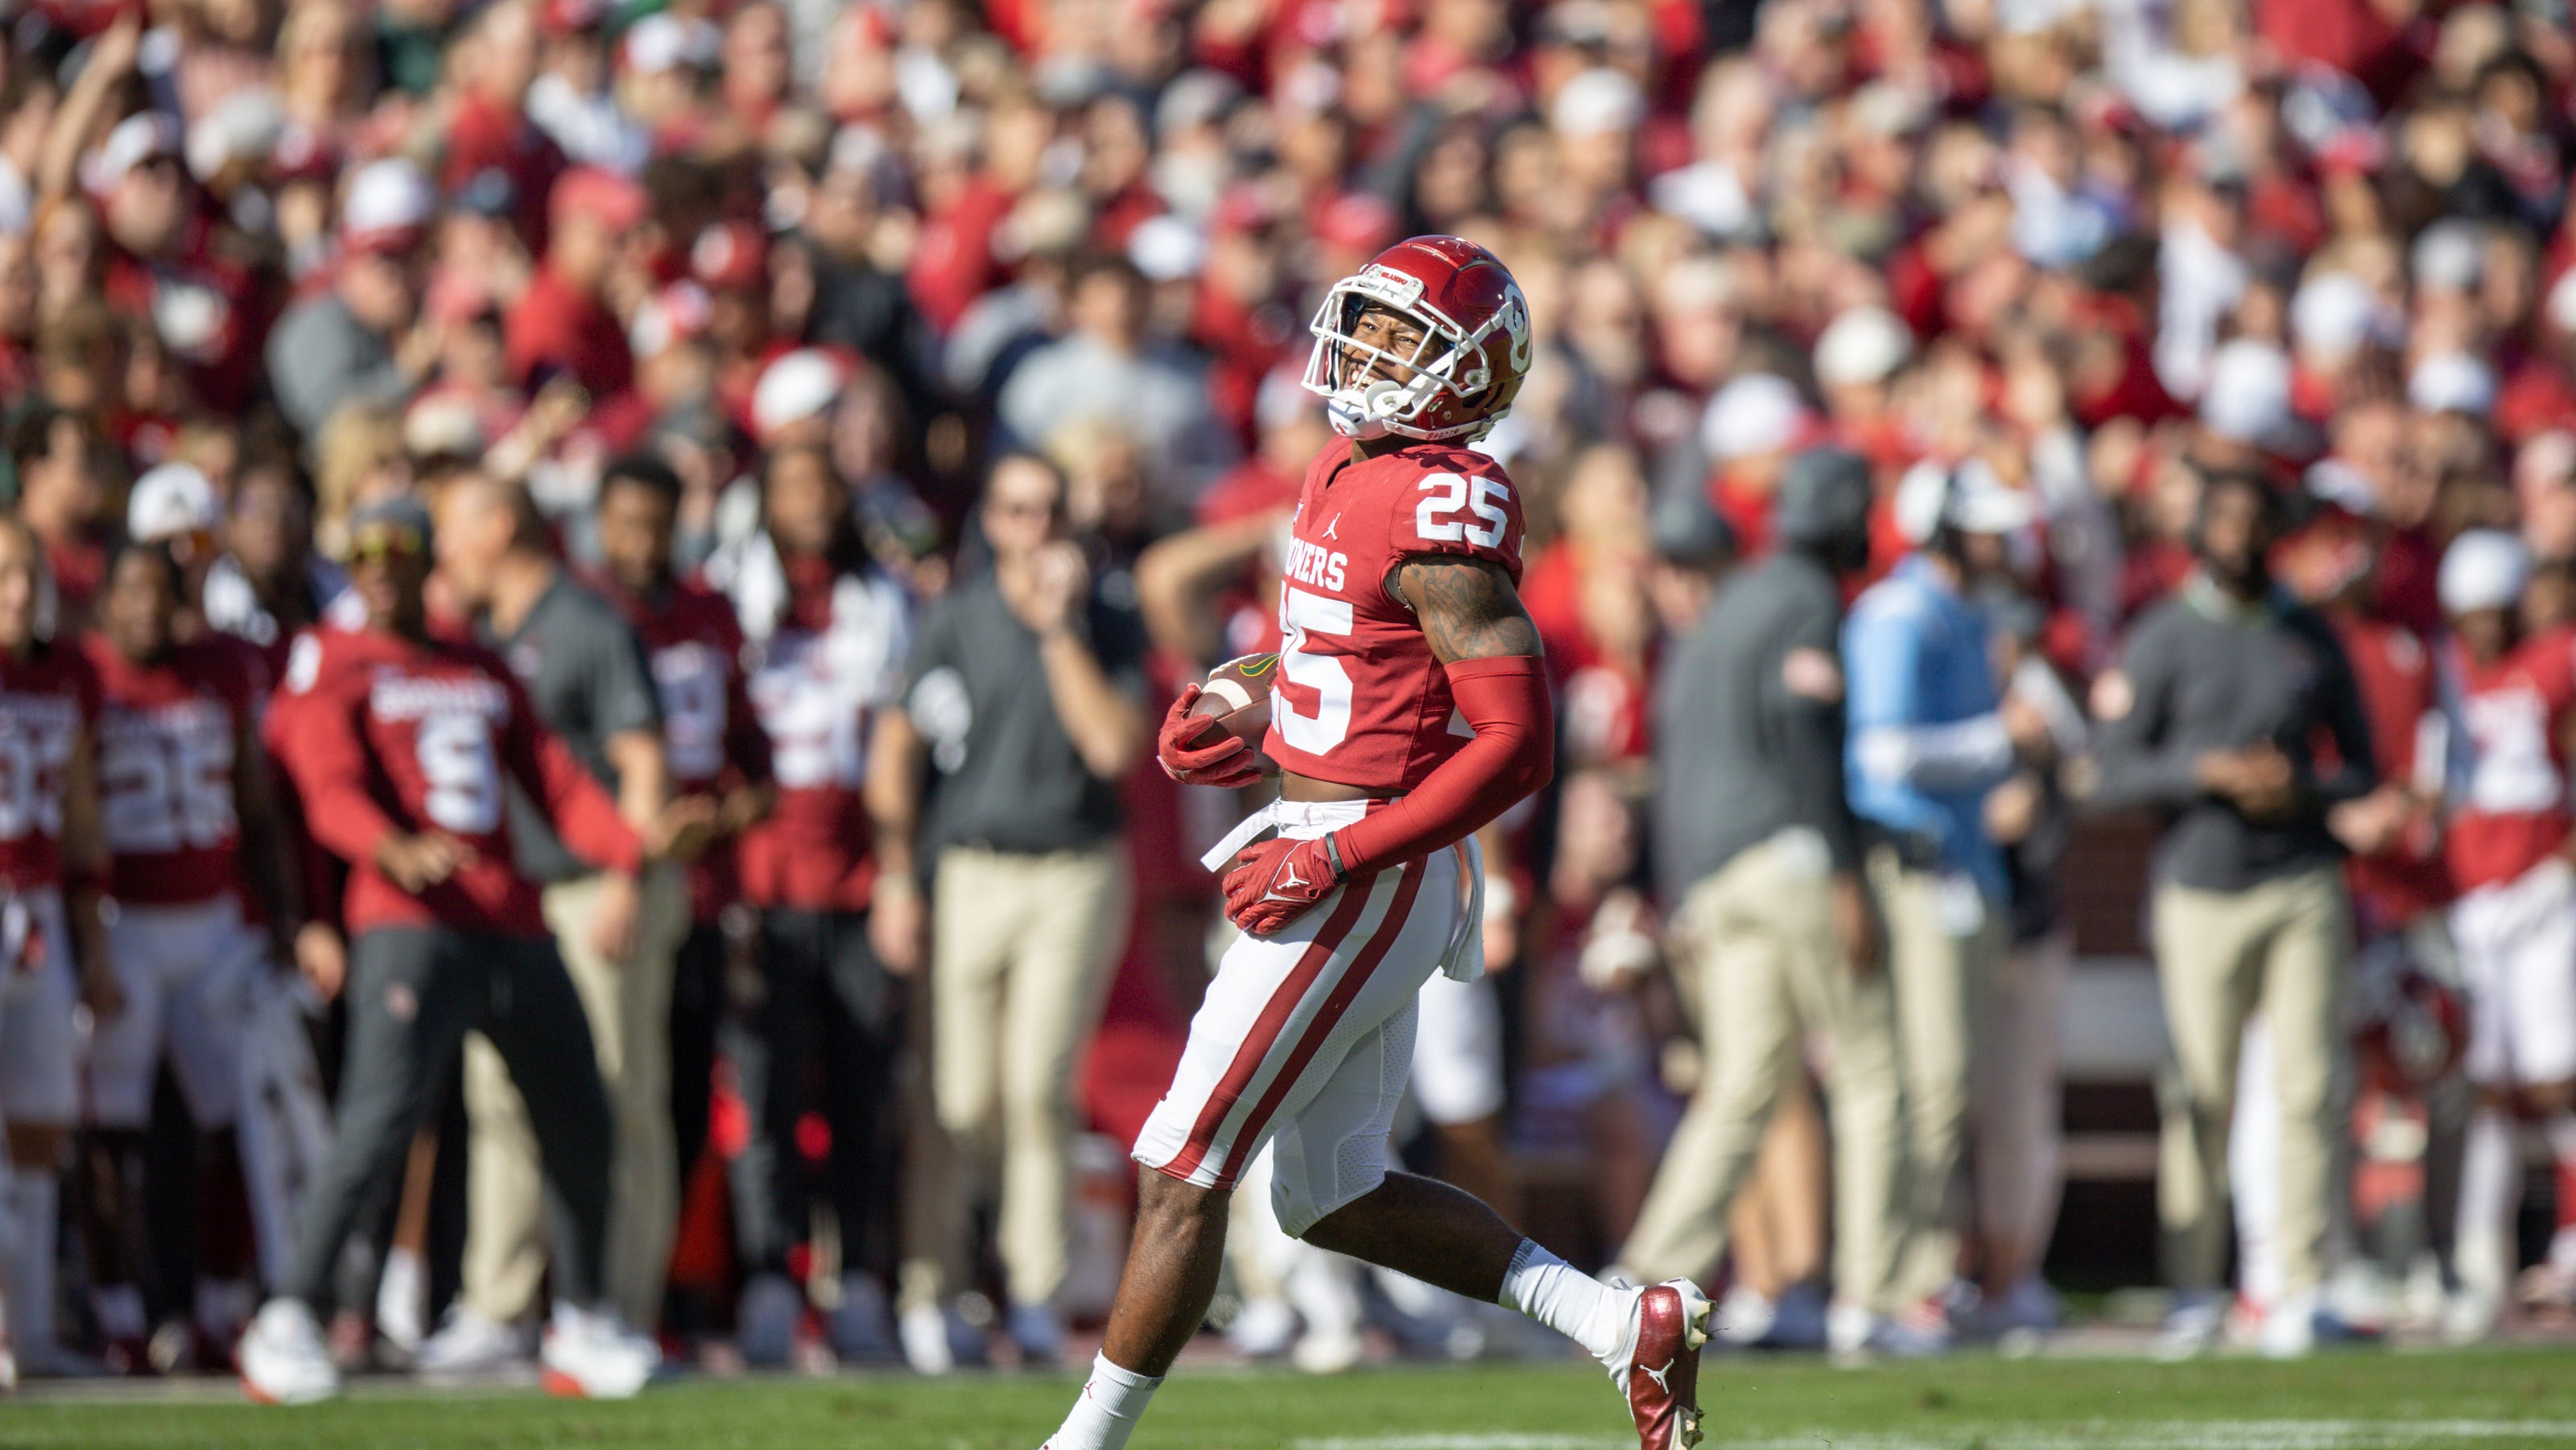   
																Get to know OU football's senior class who will be honored vs. Oklahoma State 
															 